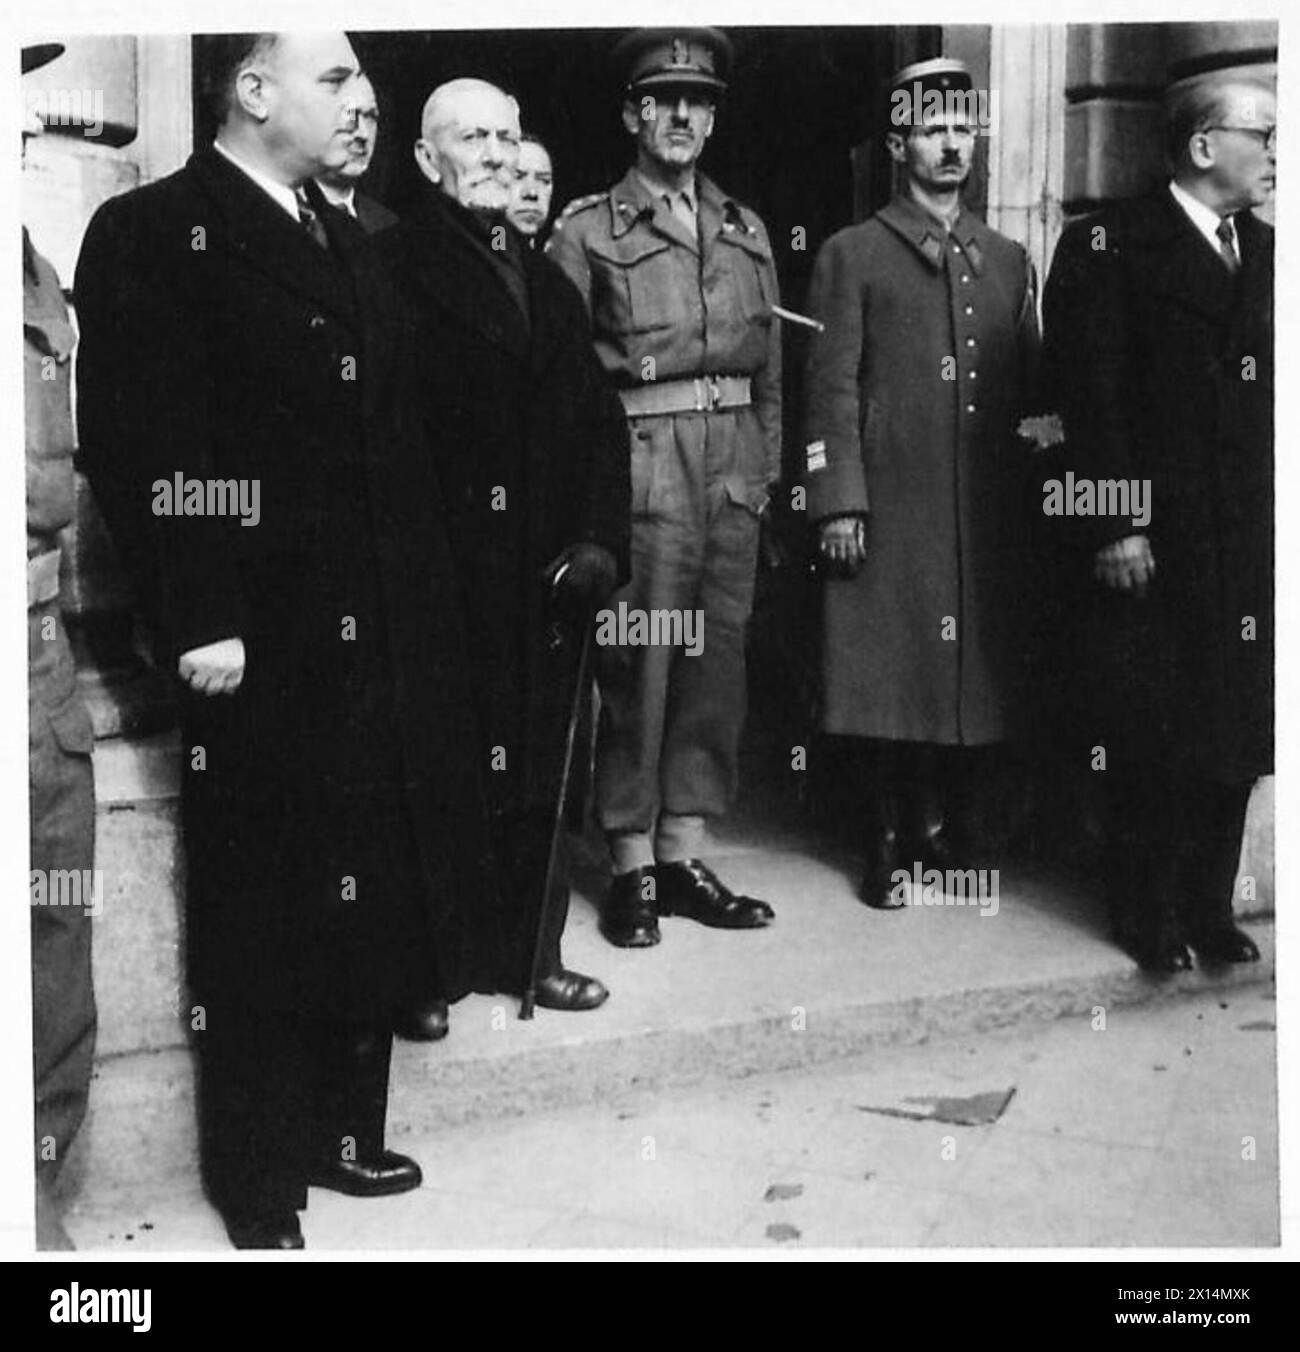 MAYOR OF BOULOGNE ATTENDS HIS FIRST PUBLIC CEREMONY. - L-R: M. Pierre Hars, assistant Prefect of Police of Boulogne, M. Eugne Canu, the new Mayor of Boulogne, Lt-Col. Texier representative of the British Military Affairs, Commandant of Police and members of the Boulogne Officials controlling the Town British Army, 21st Army Group Stock Photo